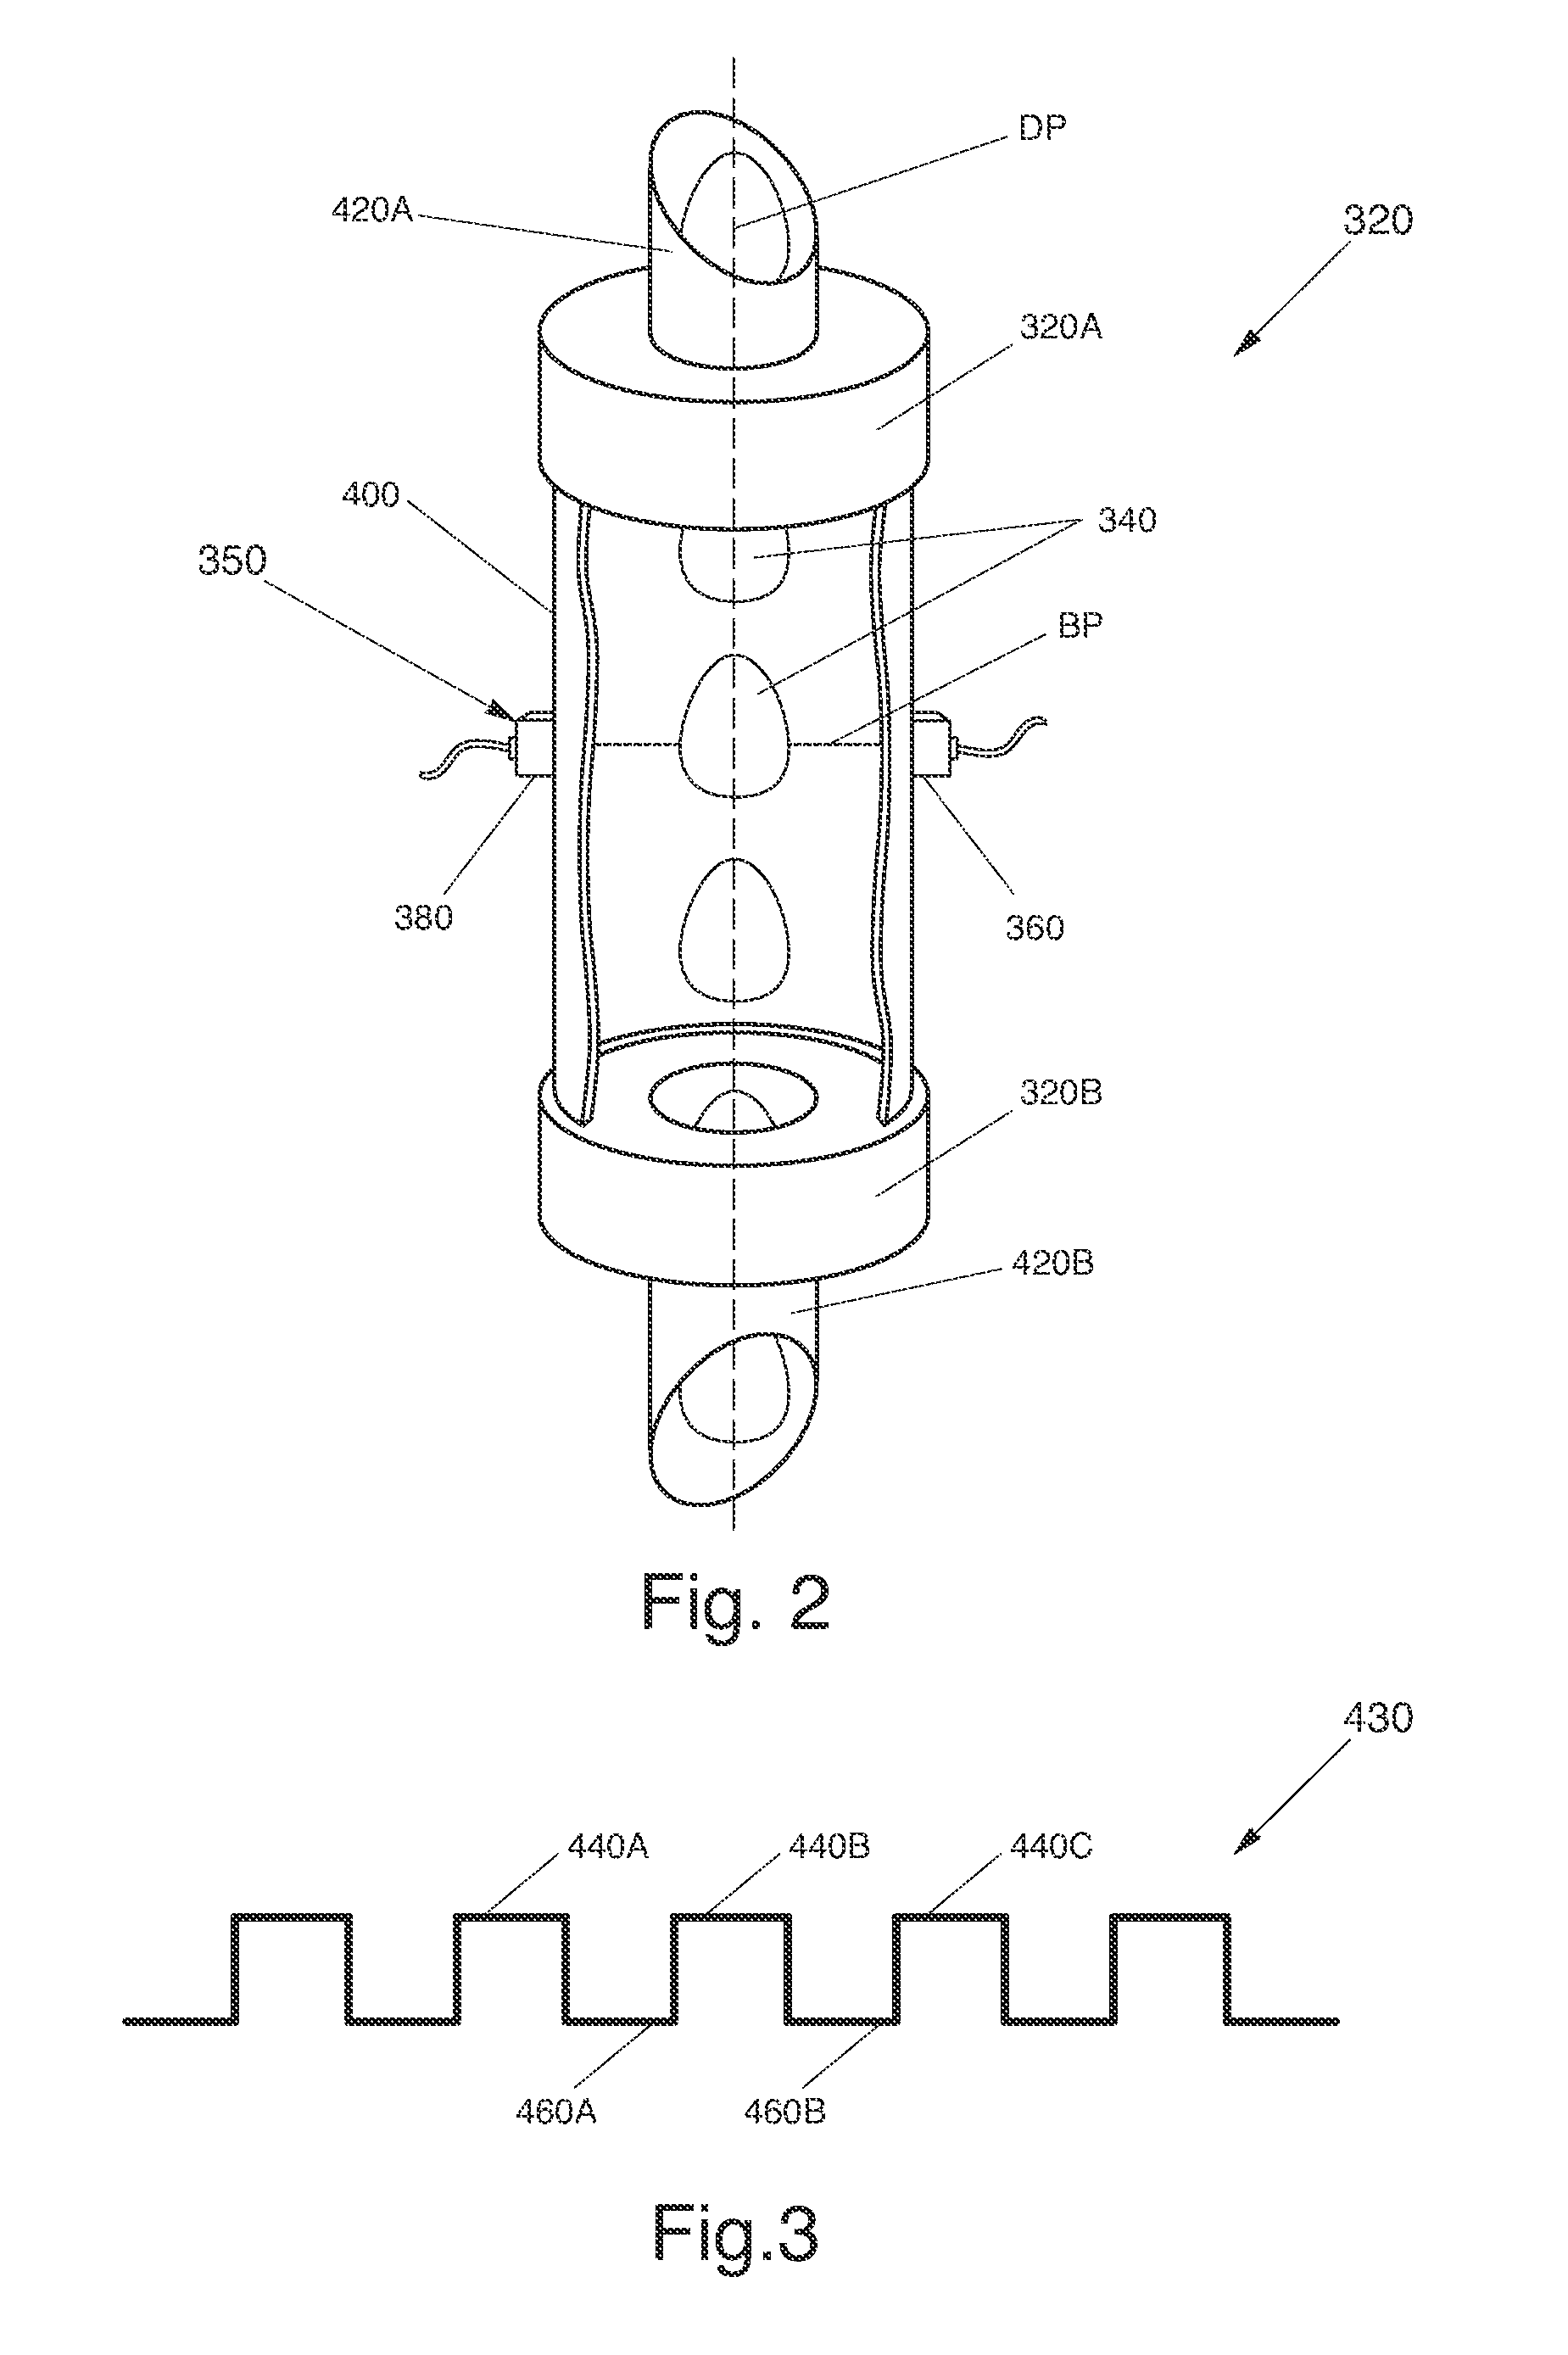 Method of operating an infrared drip sensor in an enteral pump system to reduce false alarm conditions